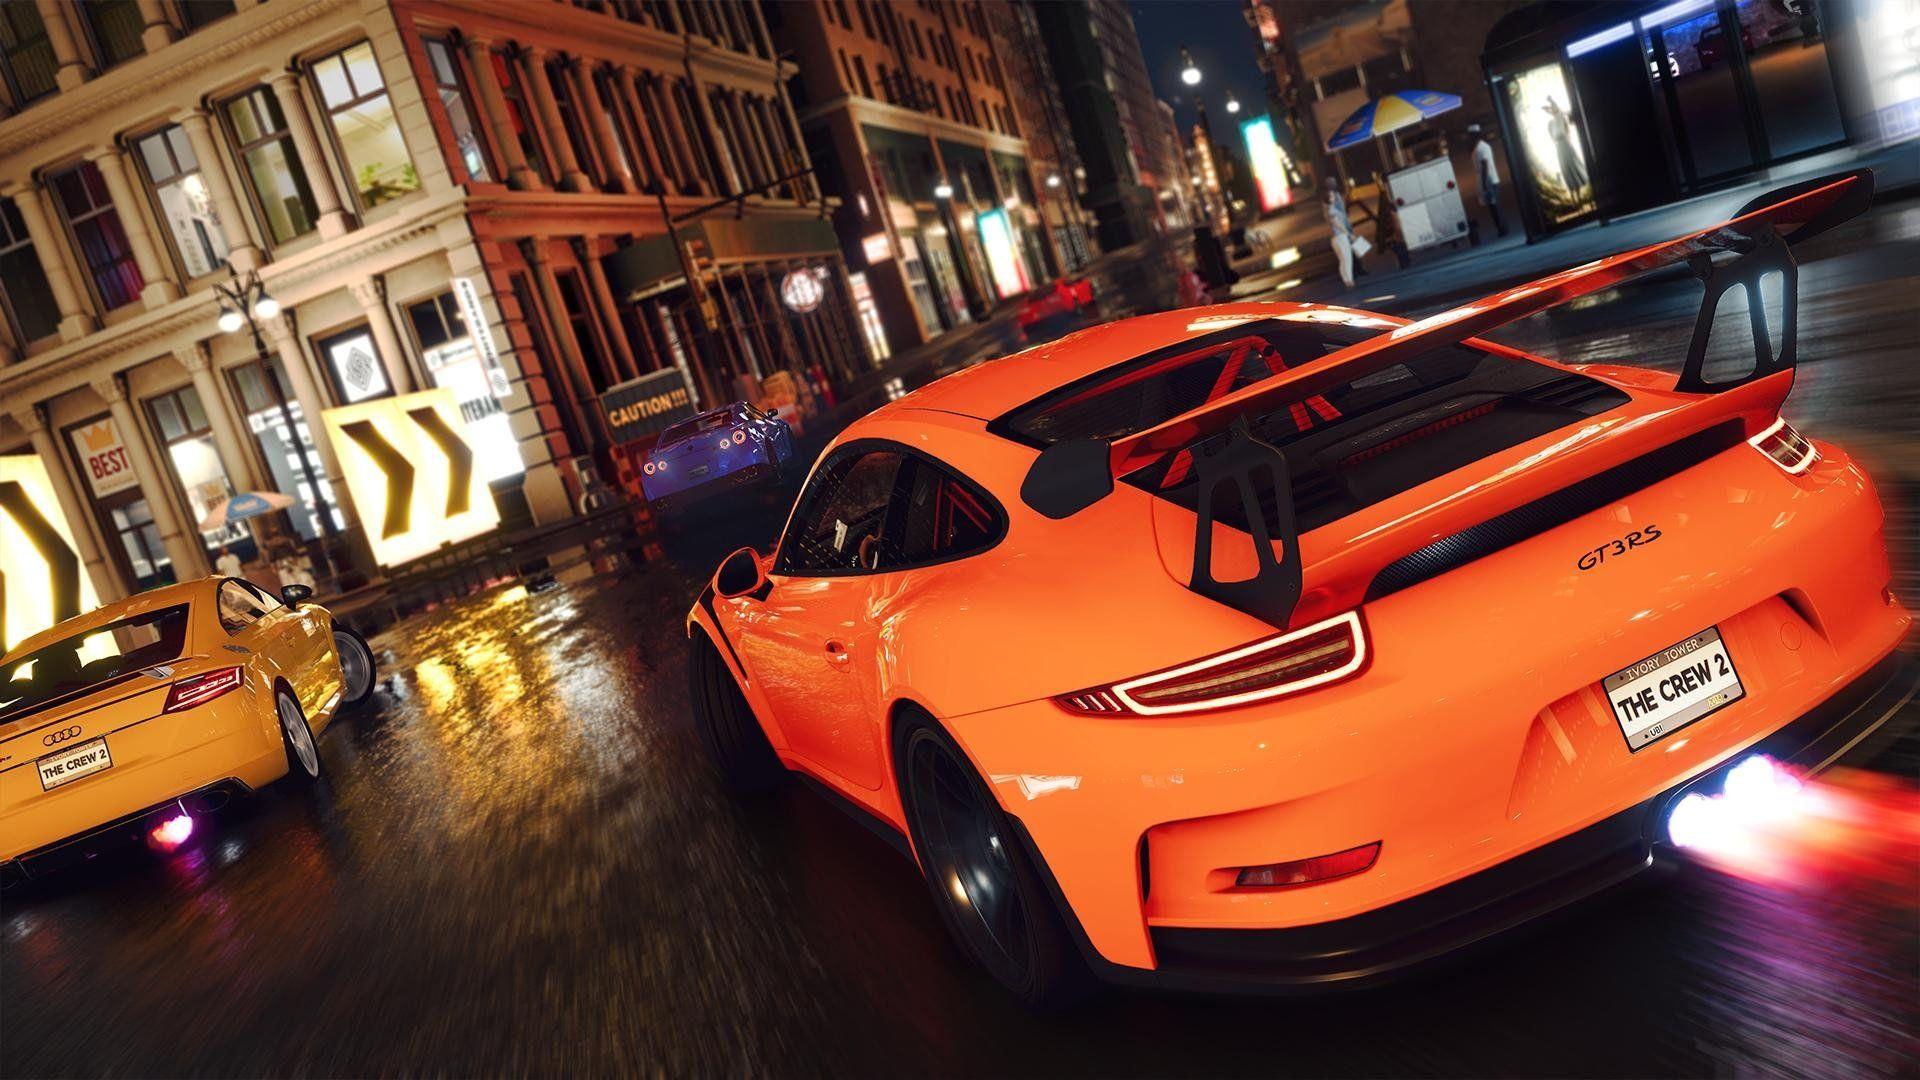 21 The Crew 2 HD Wallpapers